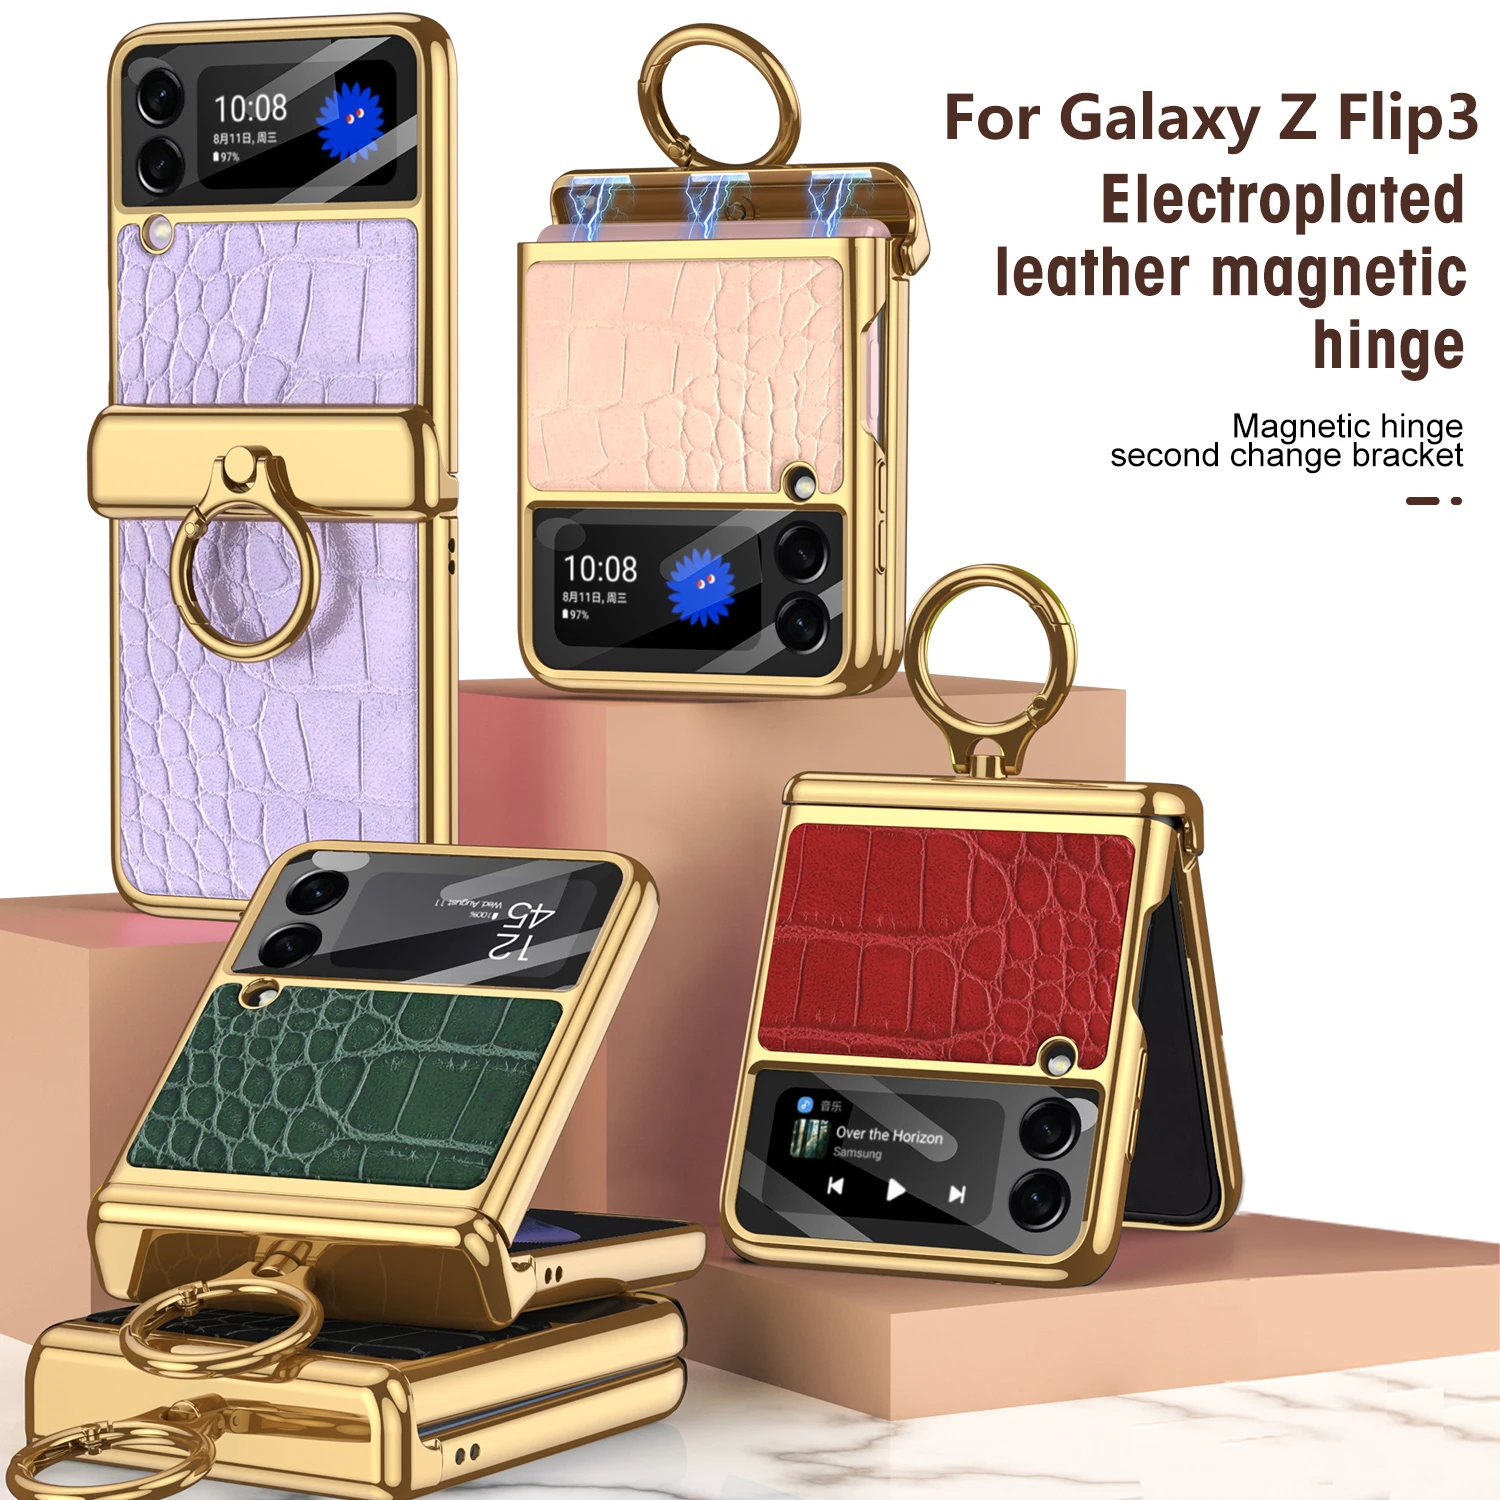 galaxy flip3 case Plain Leather Solid Color Case For Samsung Galaxy Z Flip 3 5G Phone Case Magnetic Hinge Metal Ring Holder stand case for flip3 samsung galaxy flip3 case